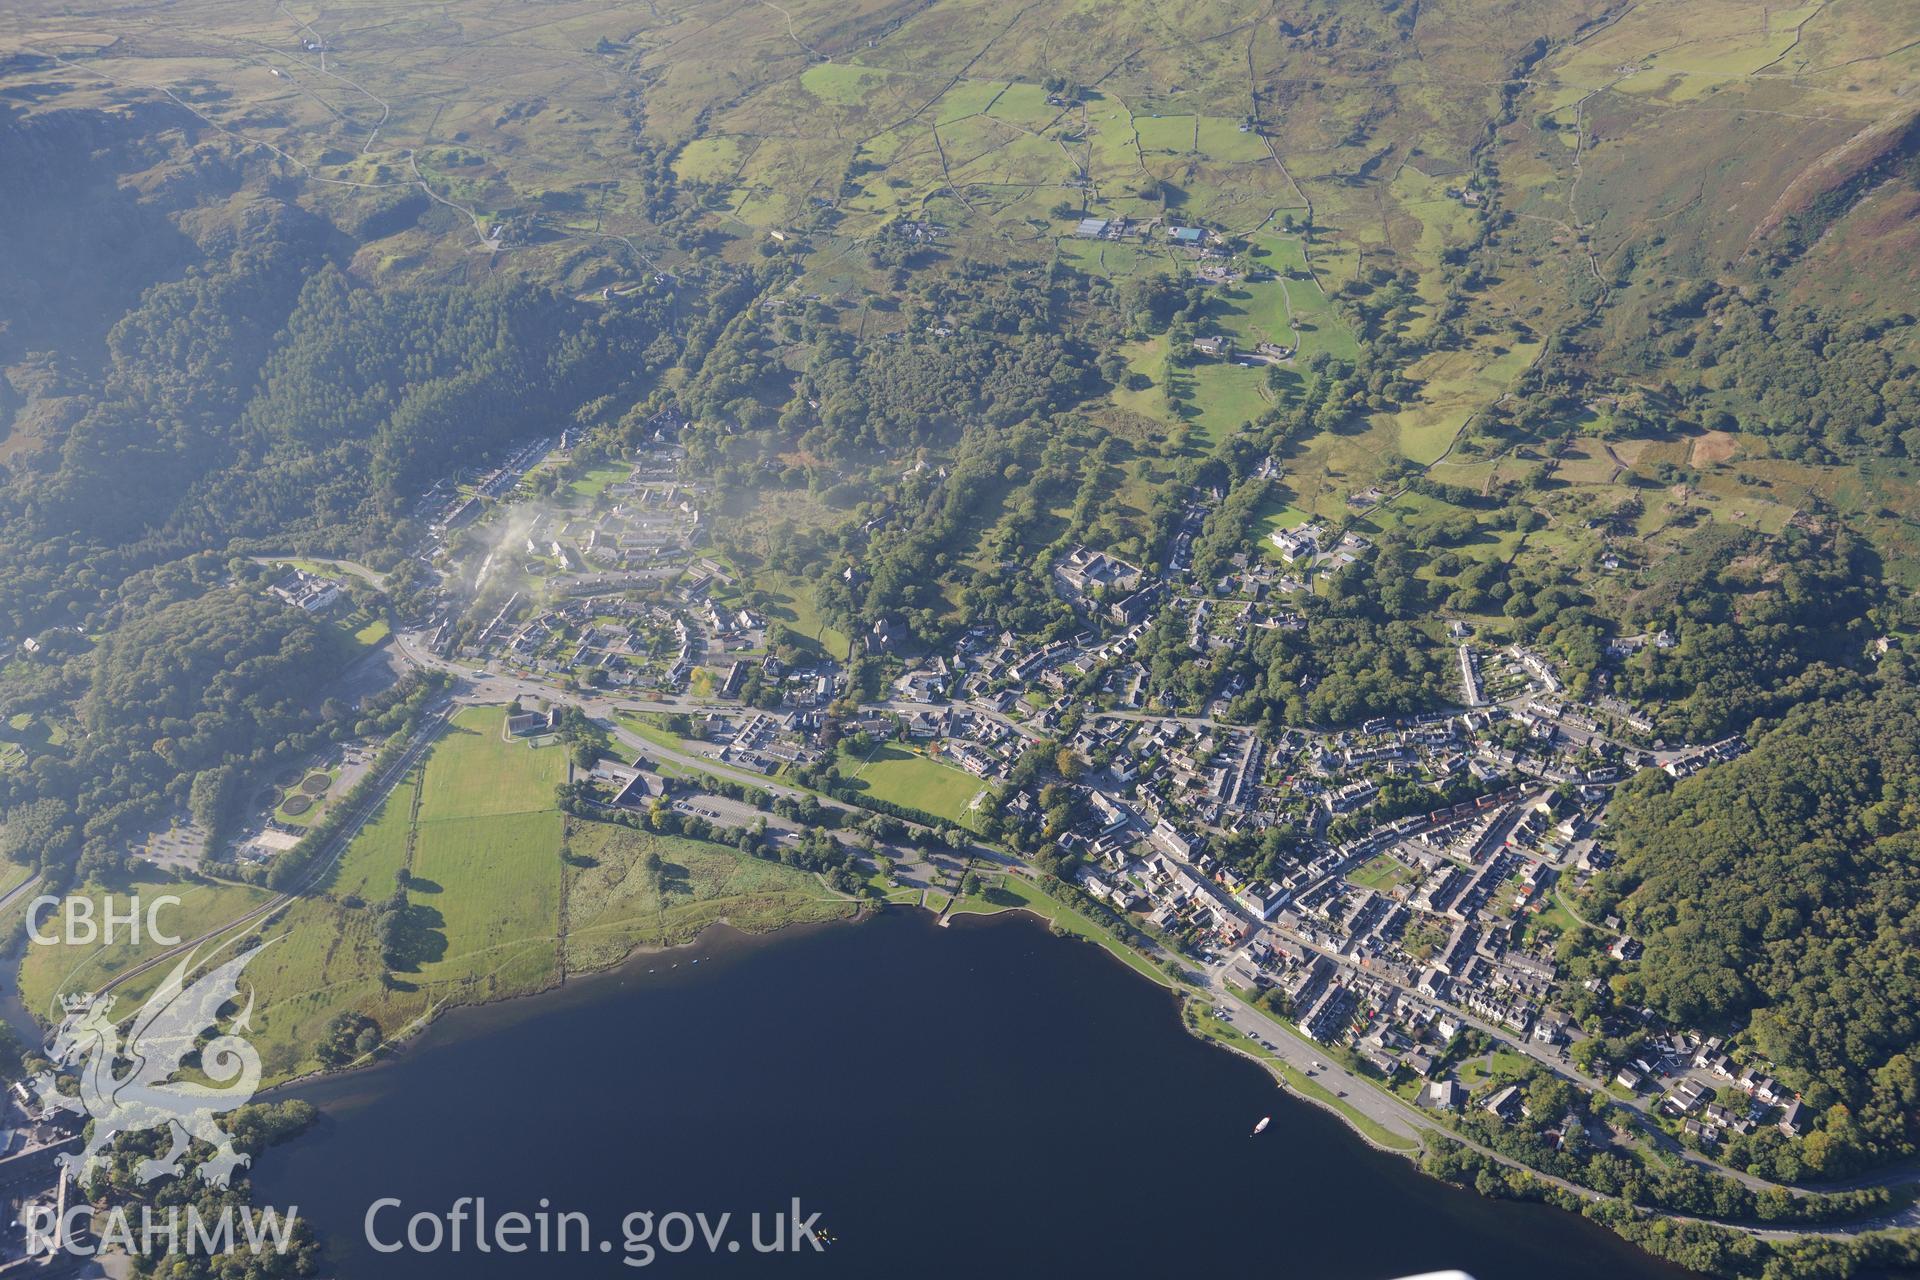 Llanberis, on the shore of Llyn Padarn and Llyn Peris. Oblique aerial photograph taken during the Royal Commission's programme of archaeological aerial reconnaissance by Toby Driver on 2nd October 2015.